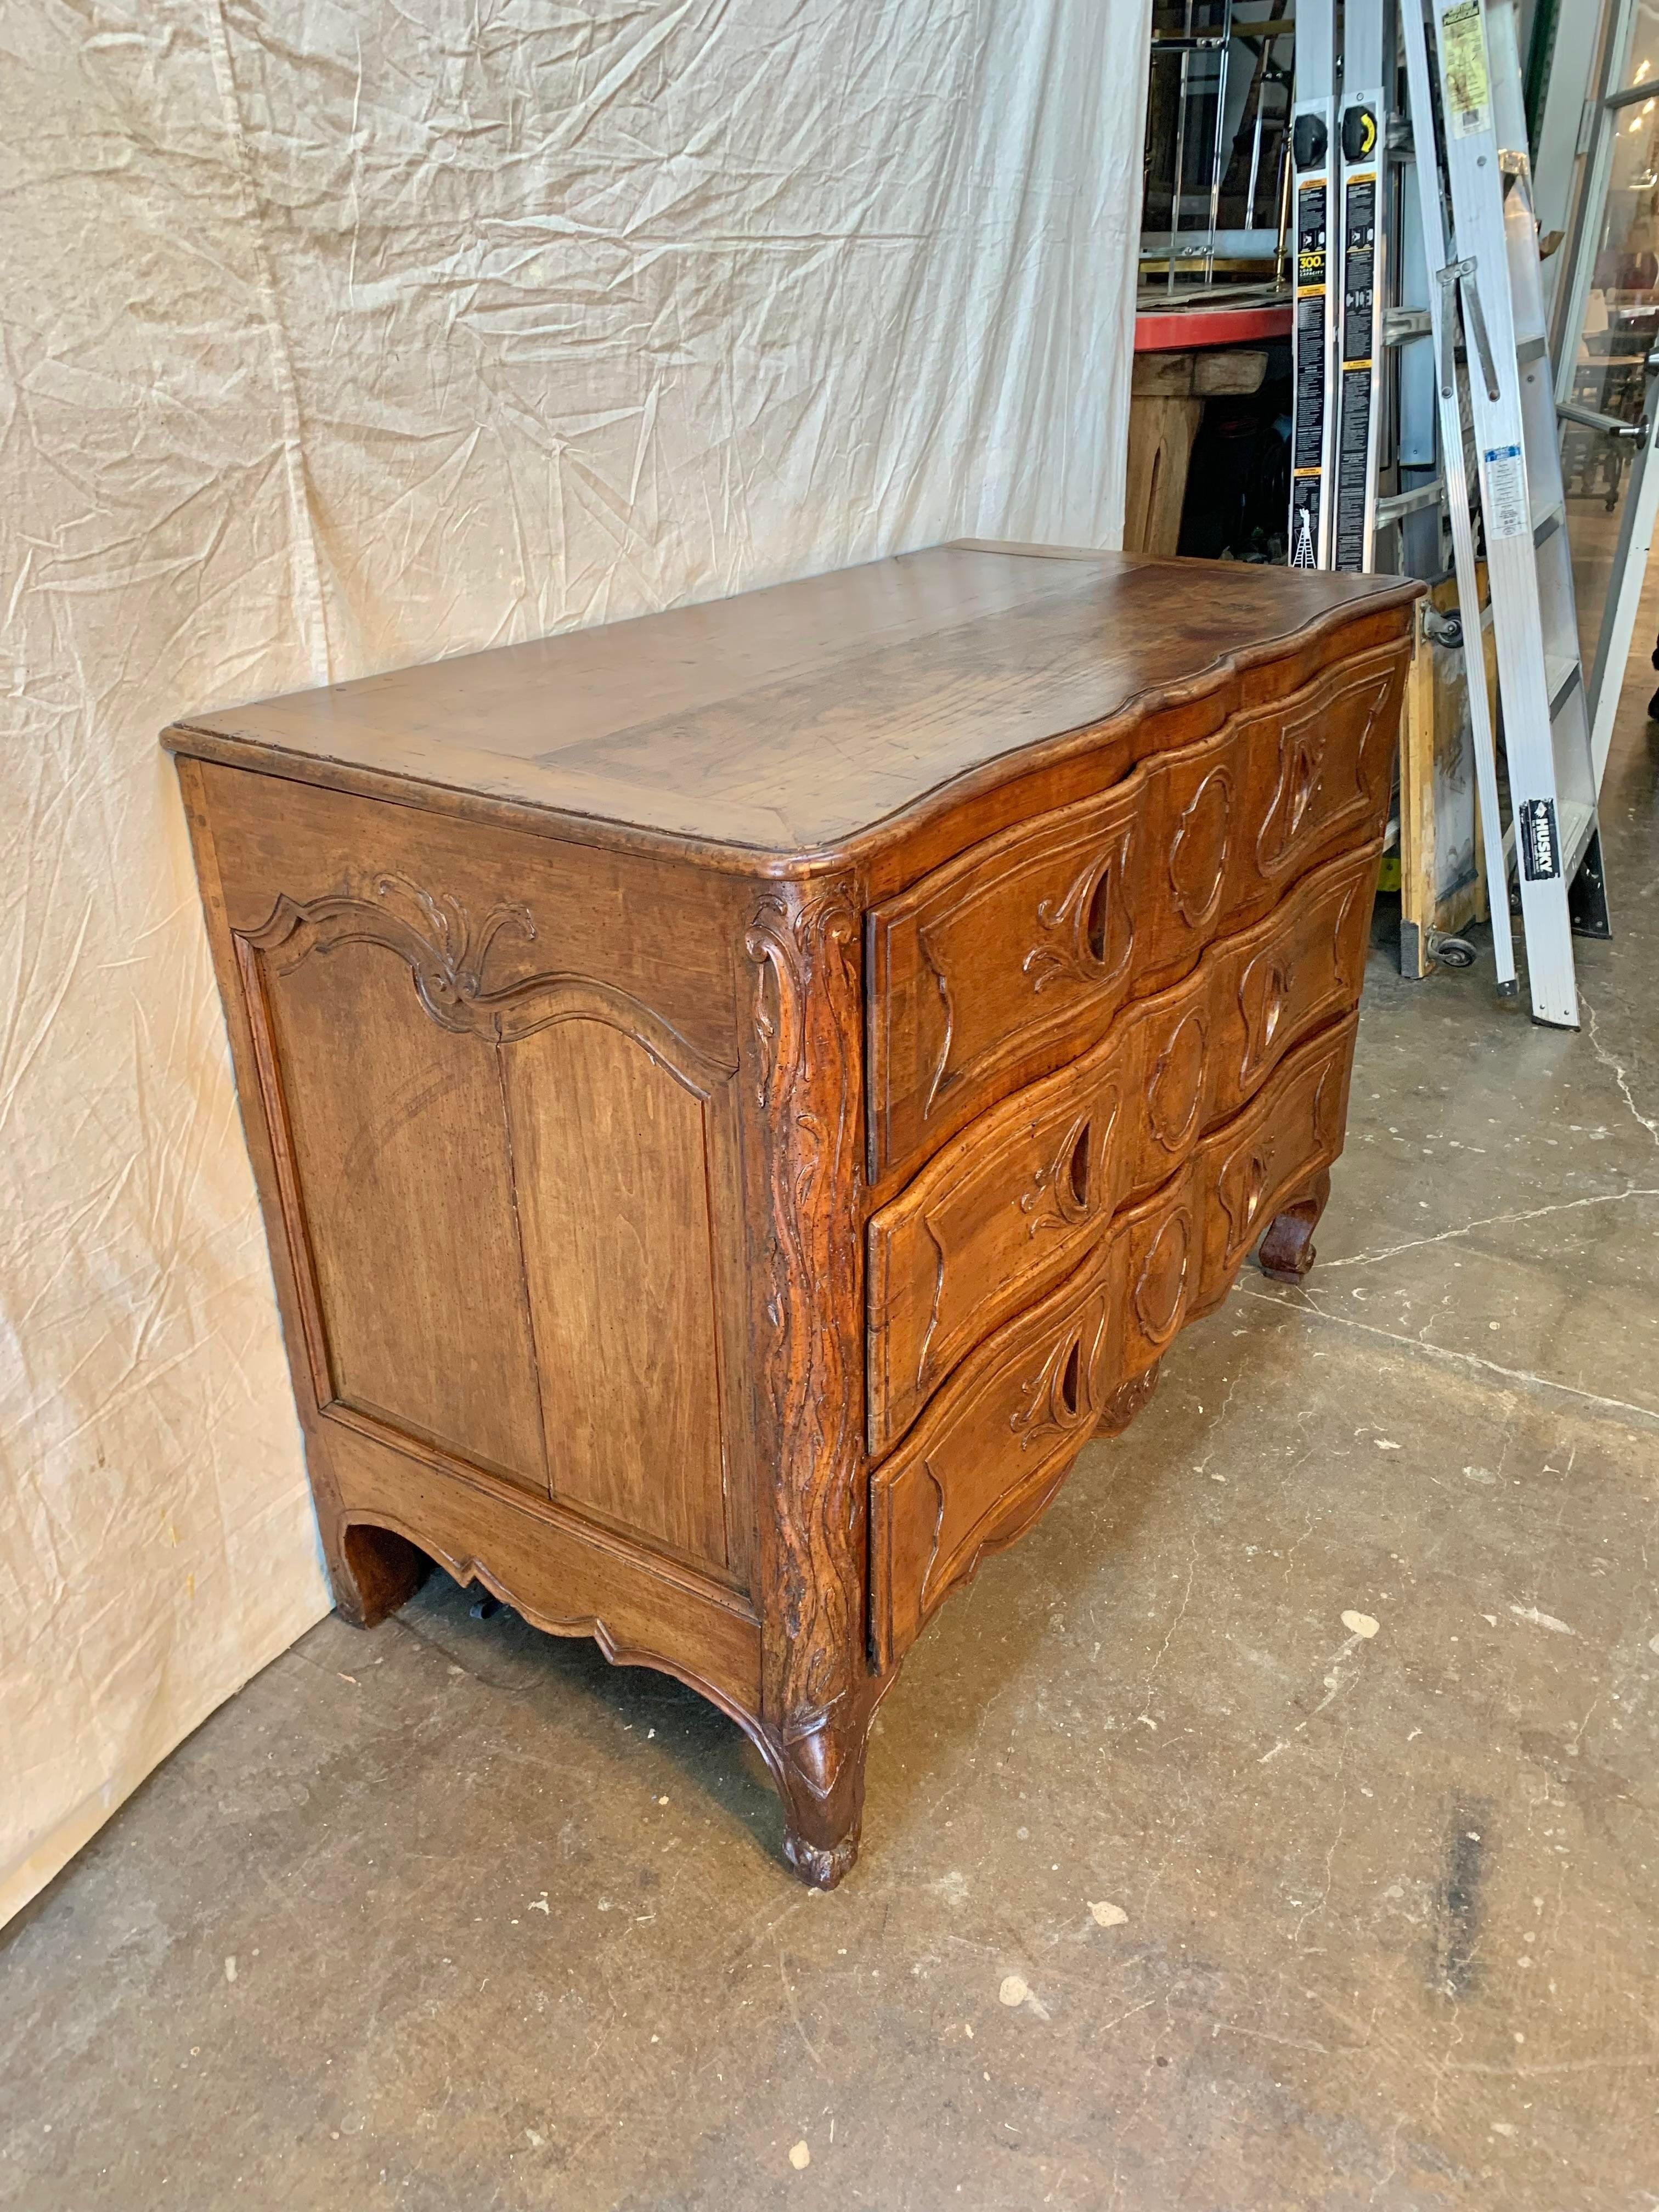 Found in the South of France, this exceptional 18th century French Commode was handcrafted and carved by talented artisans from solid old growth walnut. The piece features a two plank top that has been banded on each end with a carved serpentine